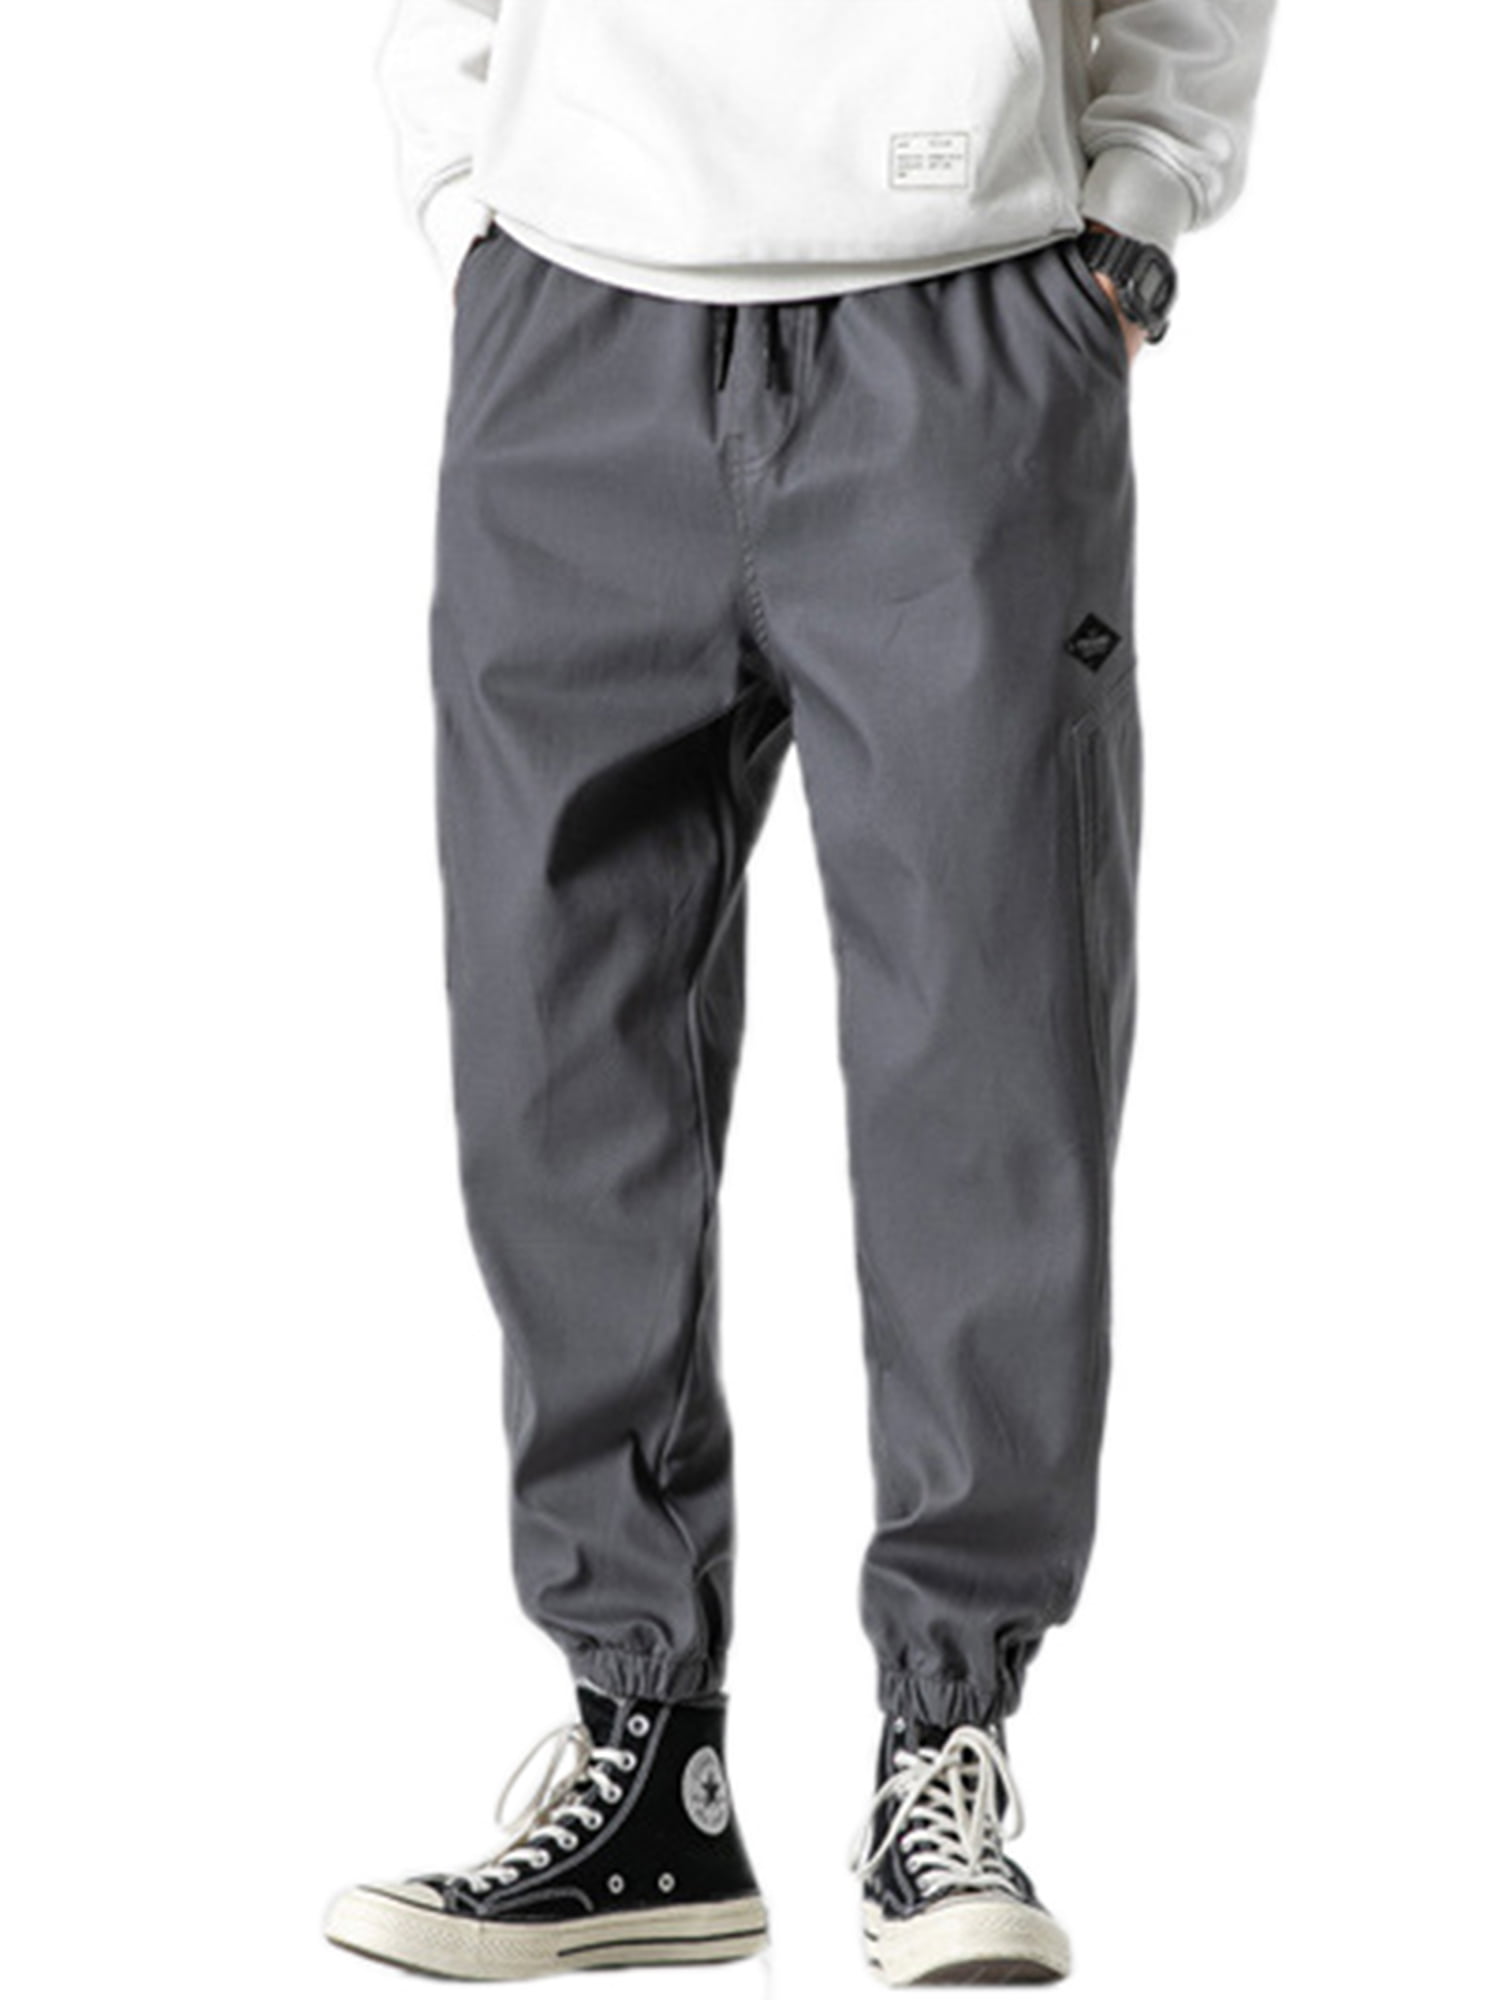 Photno Mens Pants Casual Loose Joggers Dancing Sweatpants Expandable Waist Exercise Trousers with Pockets 